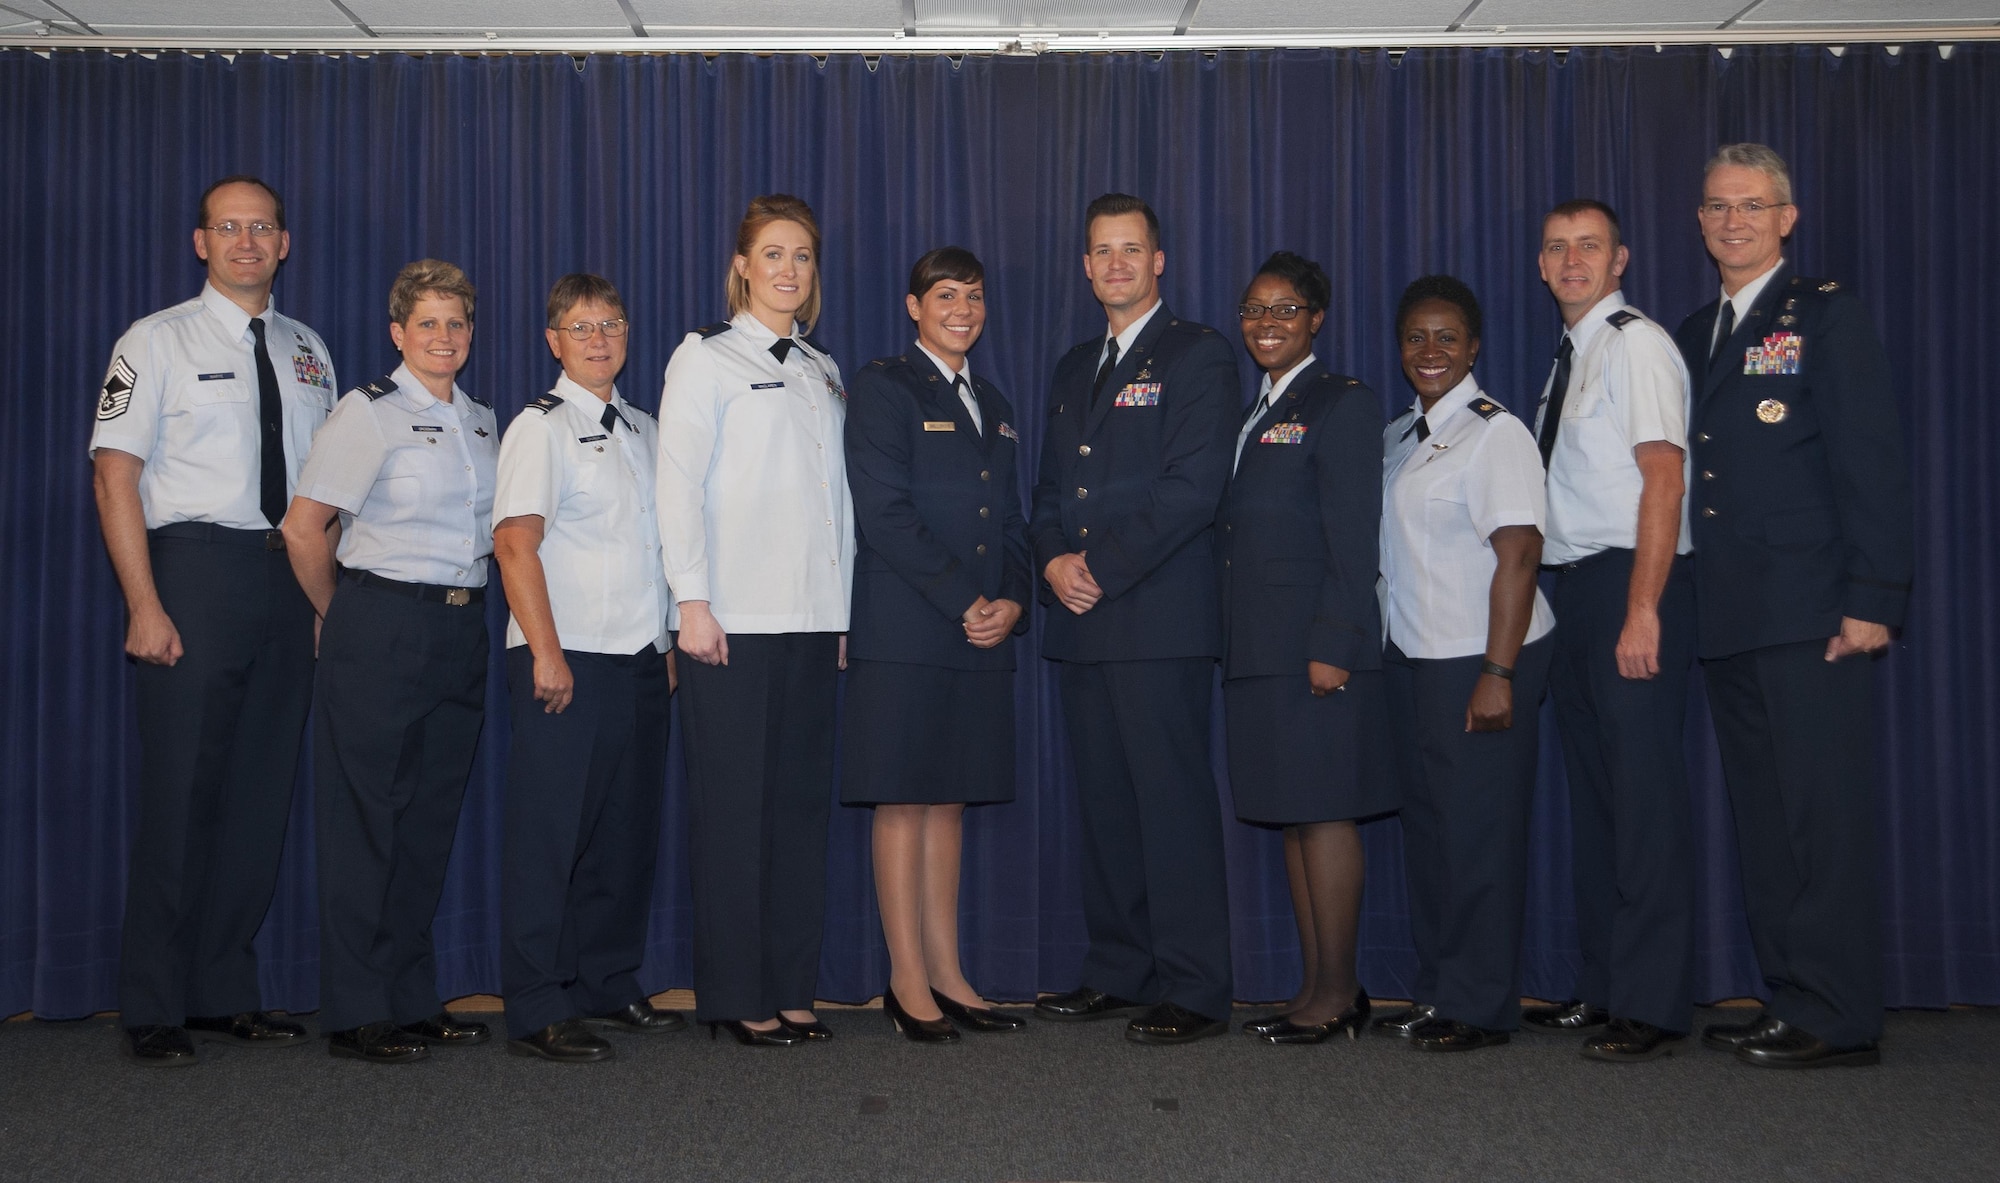 Graduates from the Tampa Nurse Transition Program pause for a photo with MacDill Air Force Base, Fla., leadership at Tampa General Hospital, Jan. 26, 2017. The goal of the program is to ease the transition of novice and inexperienced nurses to competent active duty nurses. (U.S. Air Force photo by Airman 1st Class Mariette Adams)